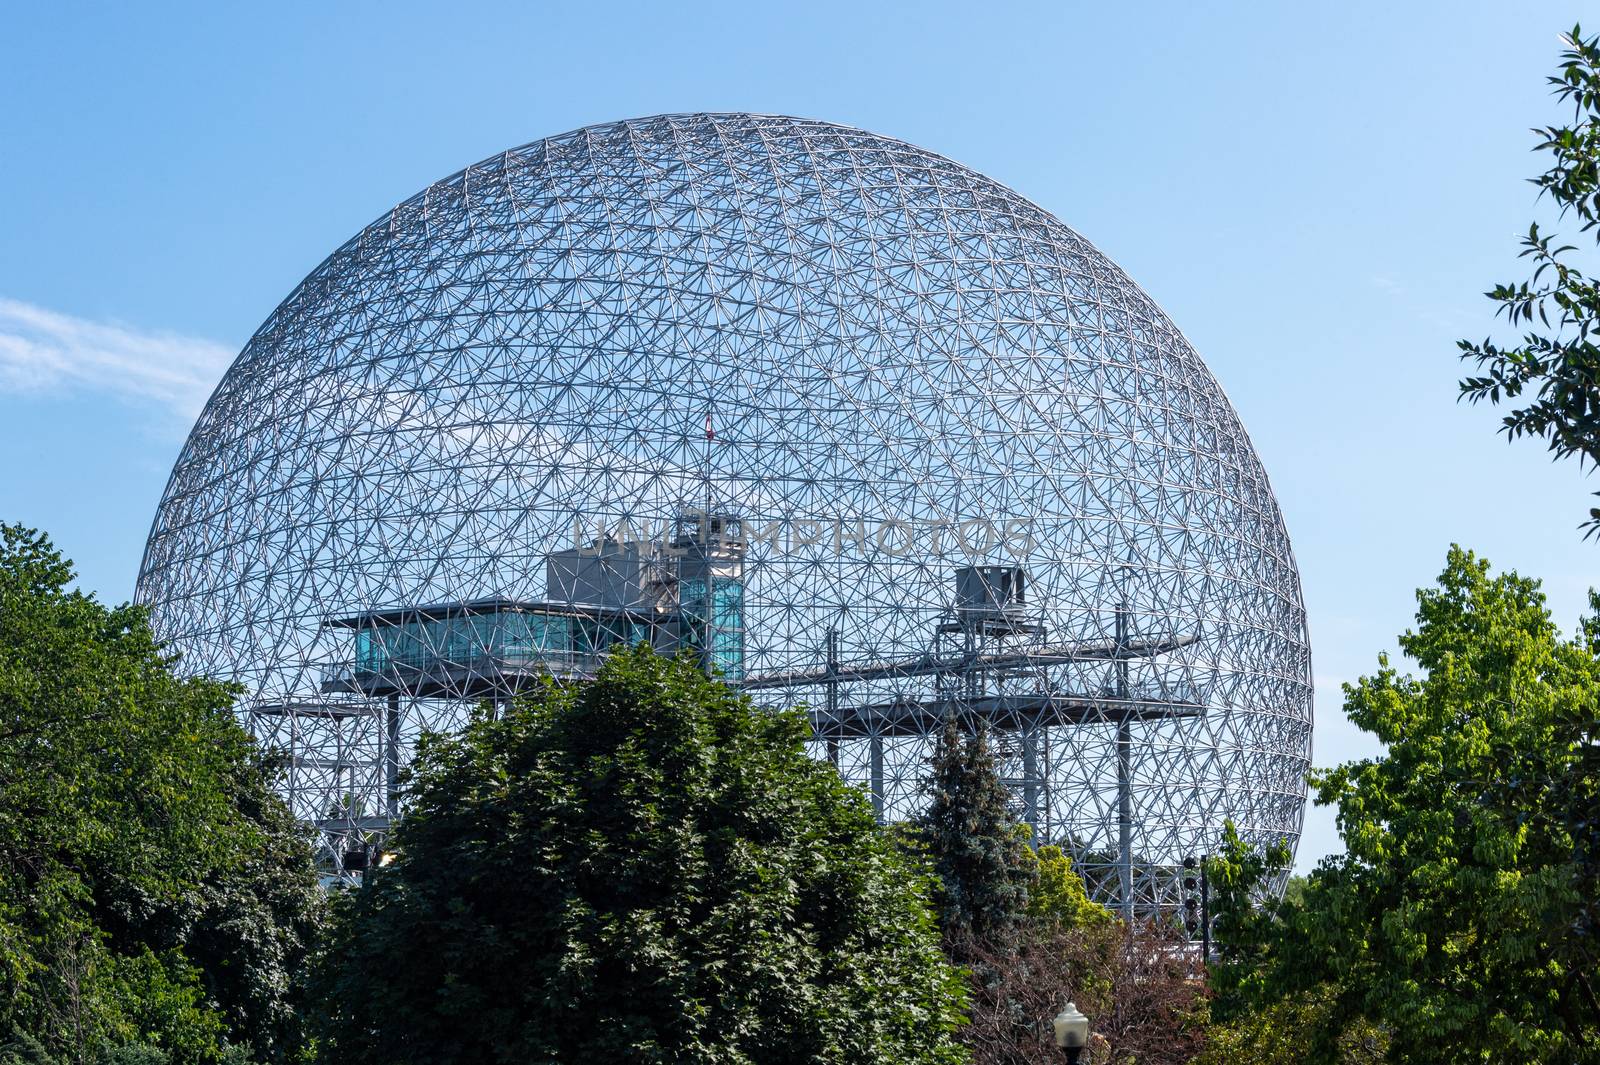 Montreal Biosphere over blue sky in the summertime (2019)